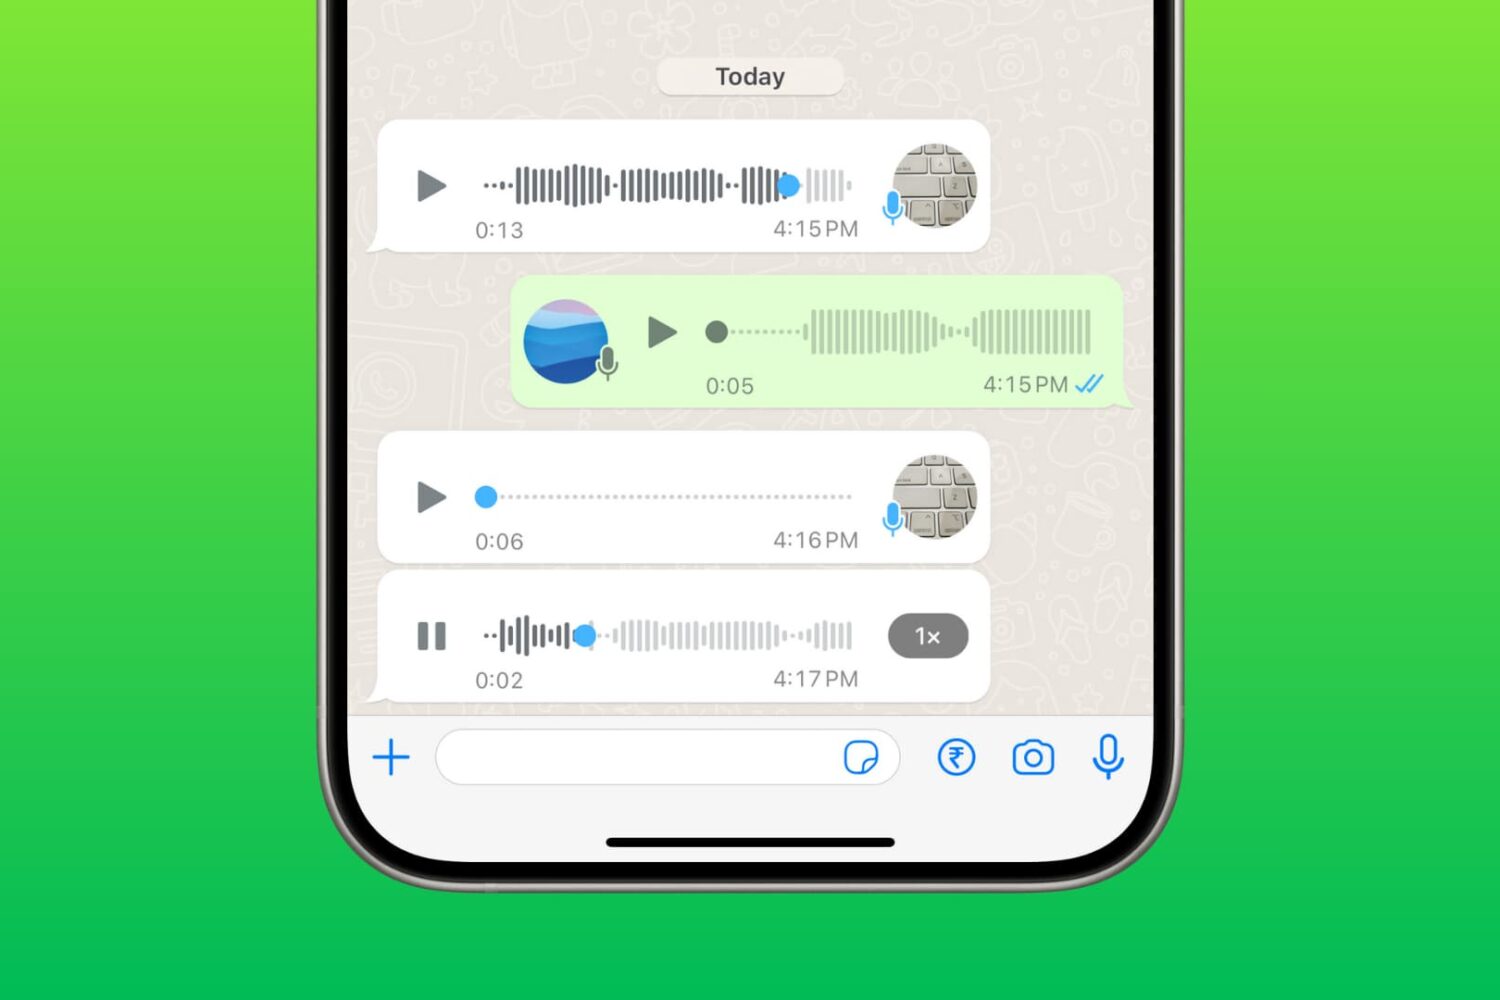 WhatsApp voice messages on iPhone